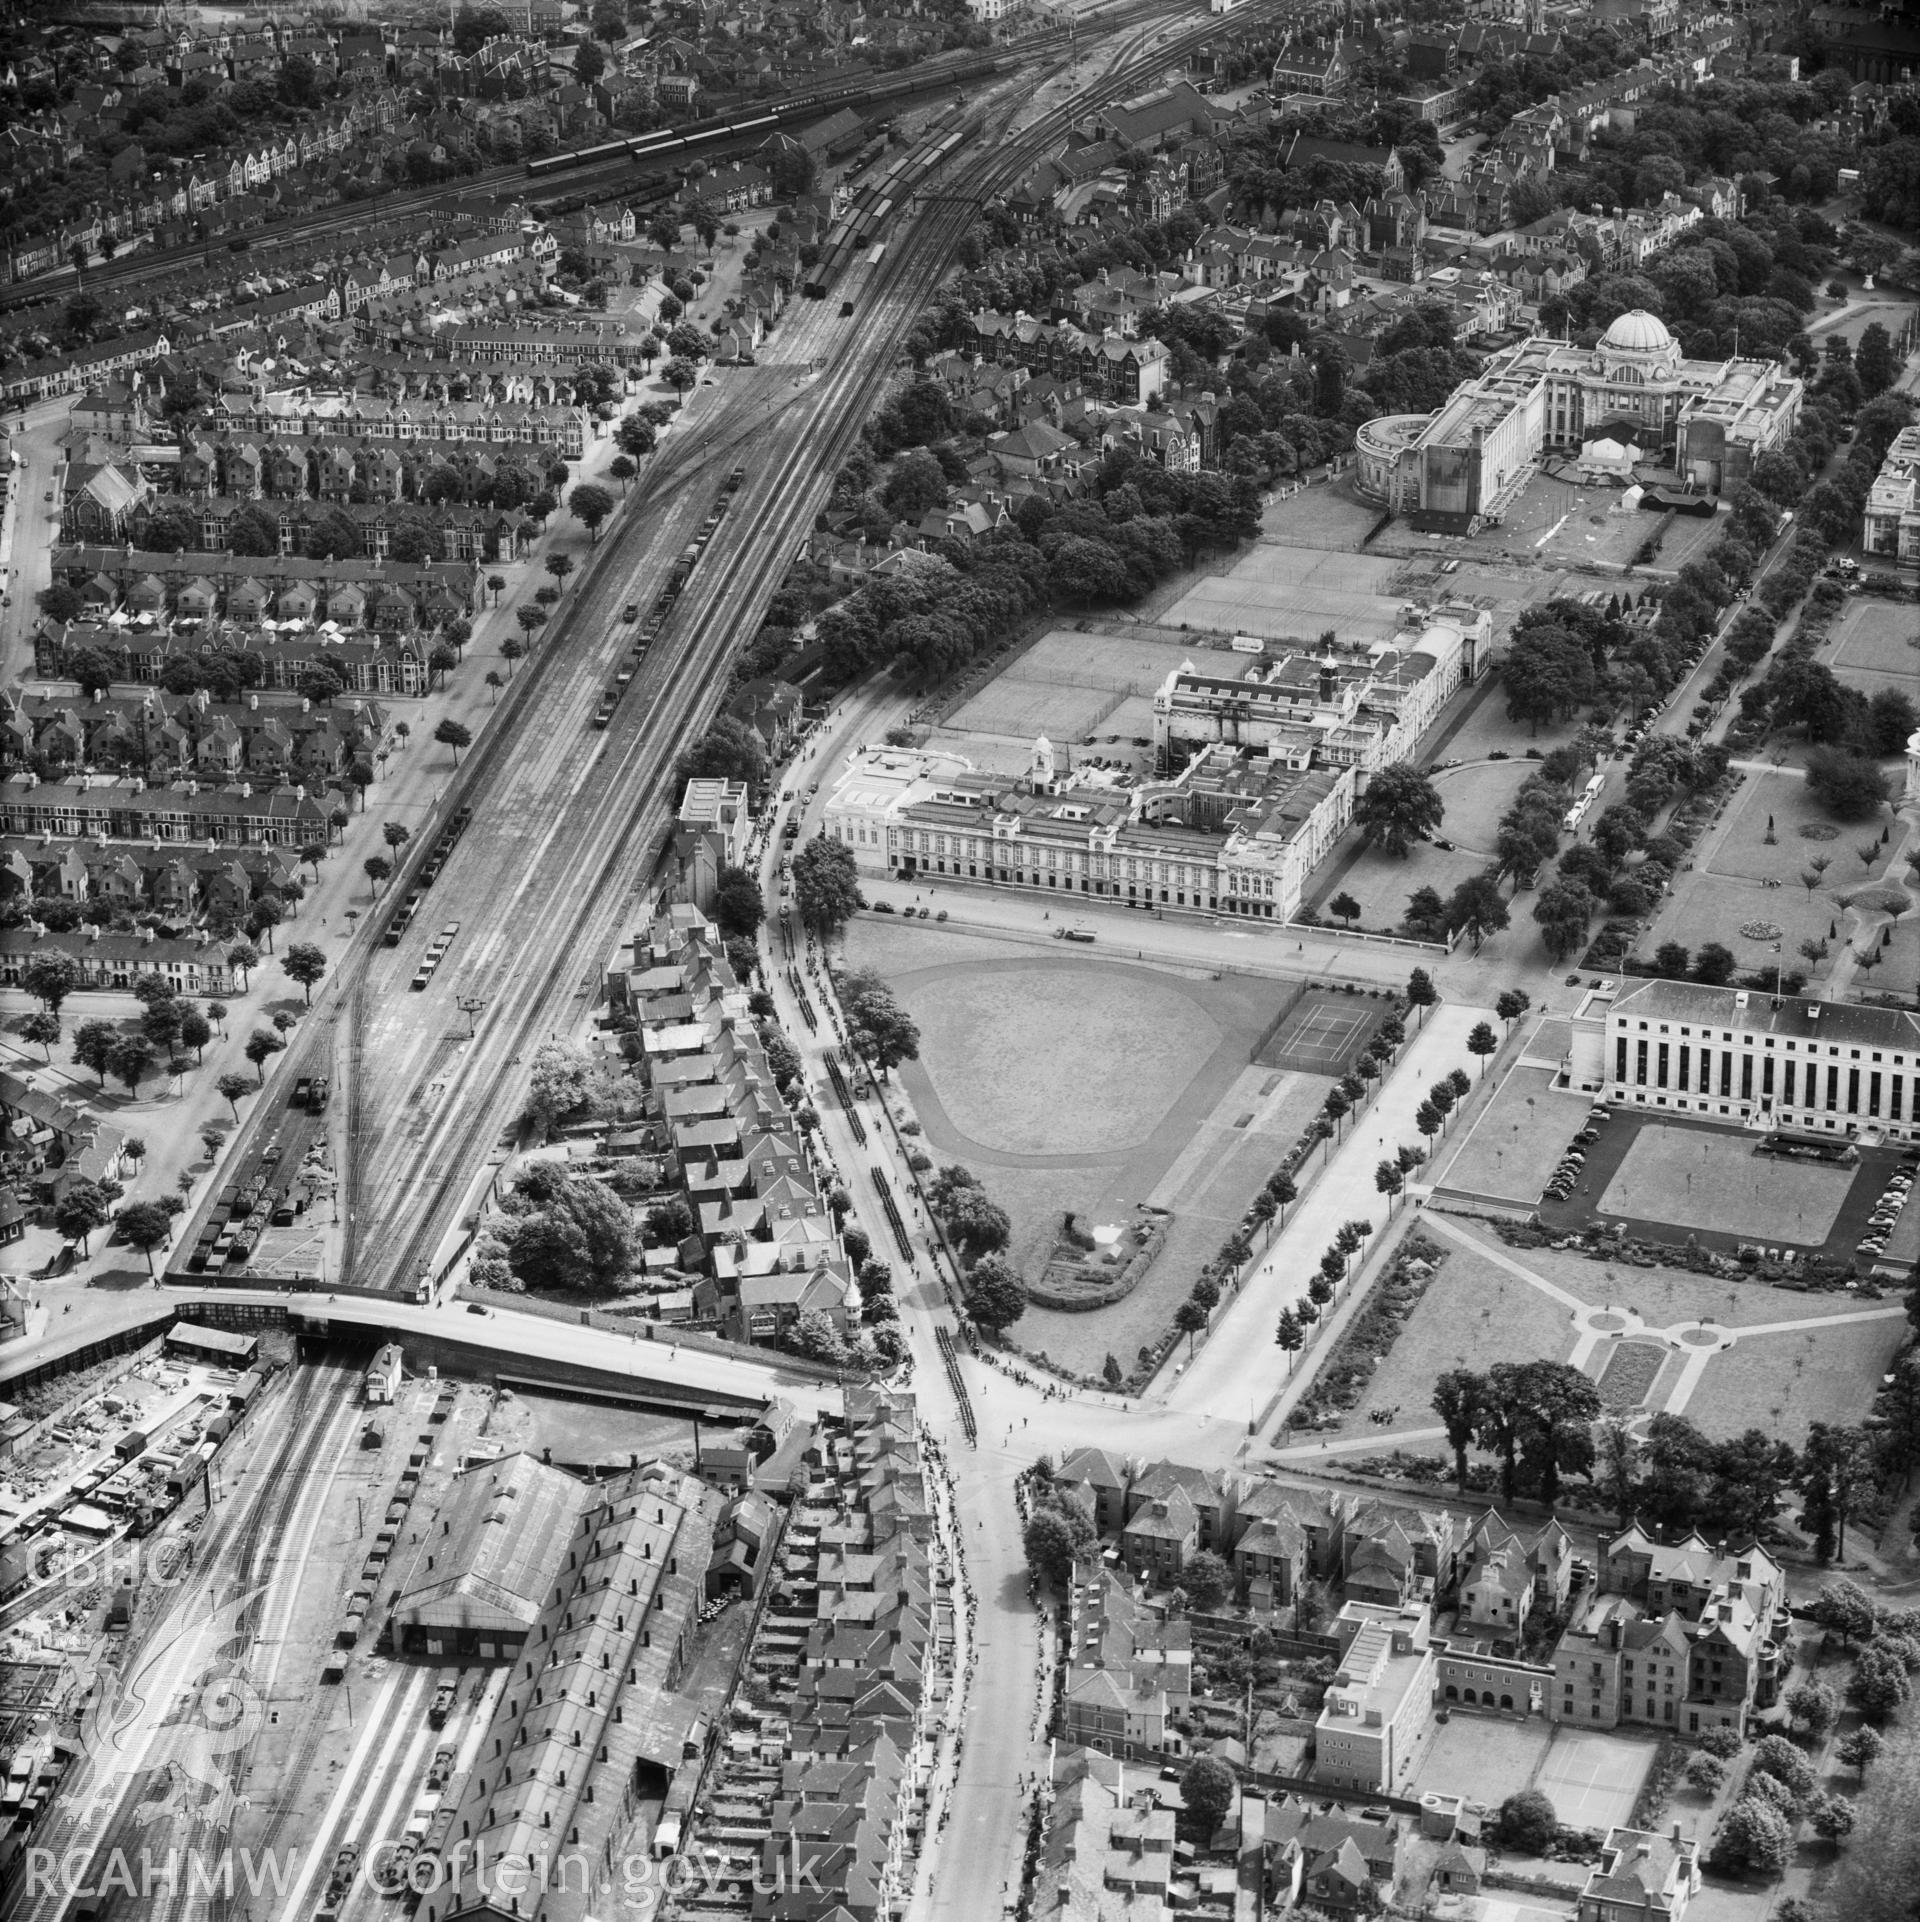 Black and white oblique aerial photograph showing Cathays Park, Cardiff, from Aerofilms album Cardiff (W22), taken by Aerofilms Ltd and dated 1953.